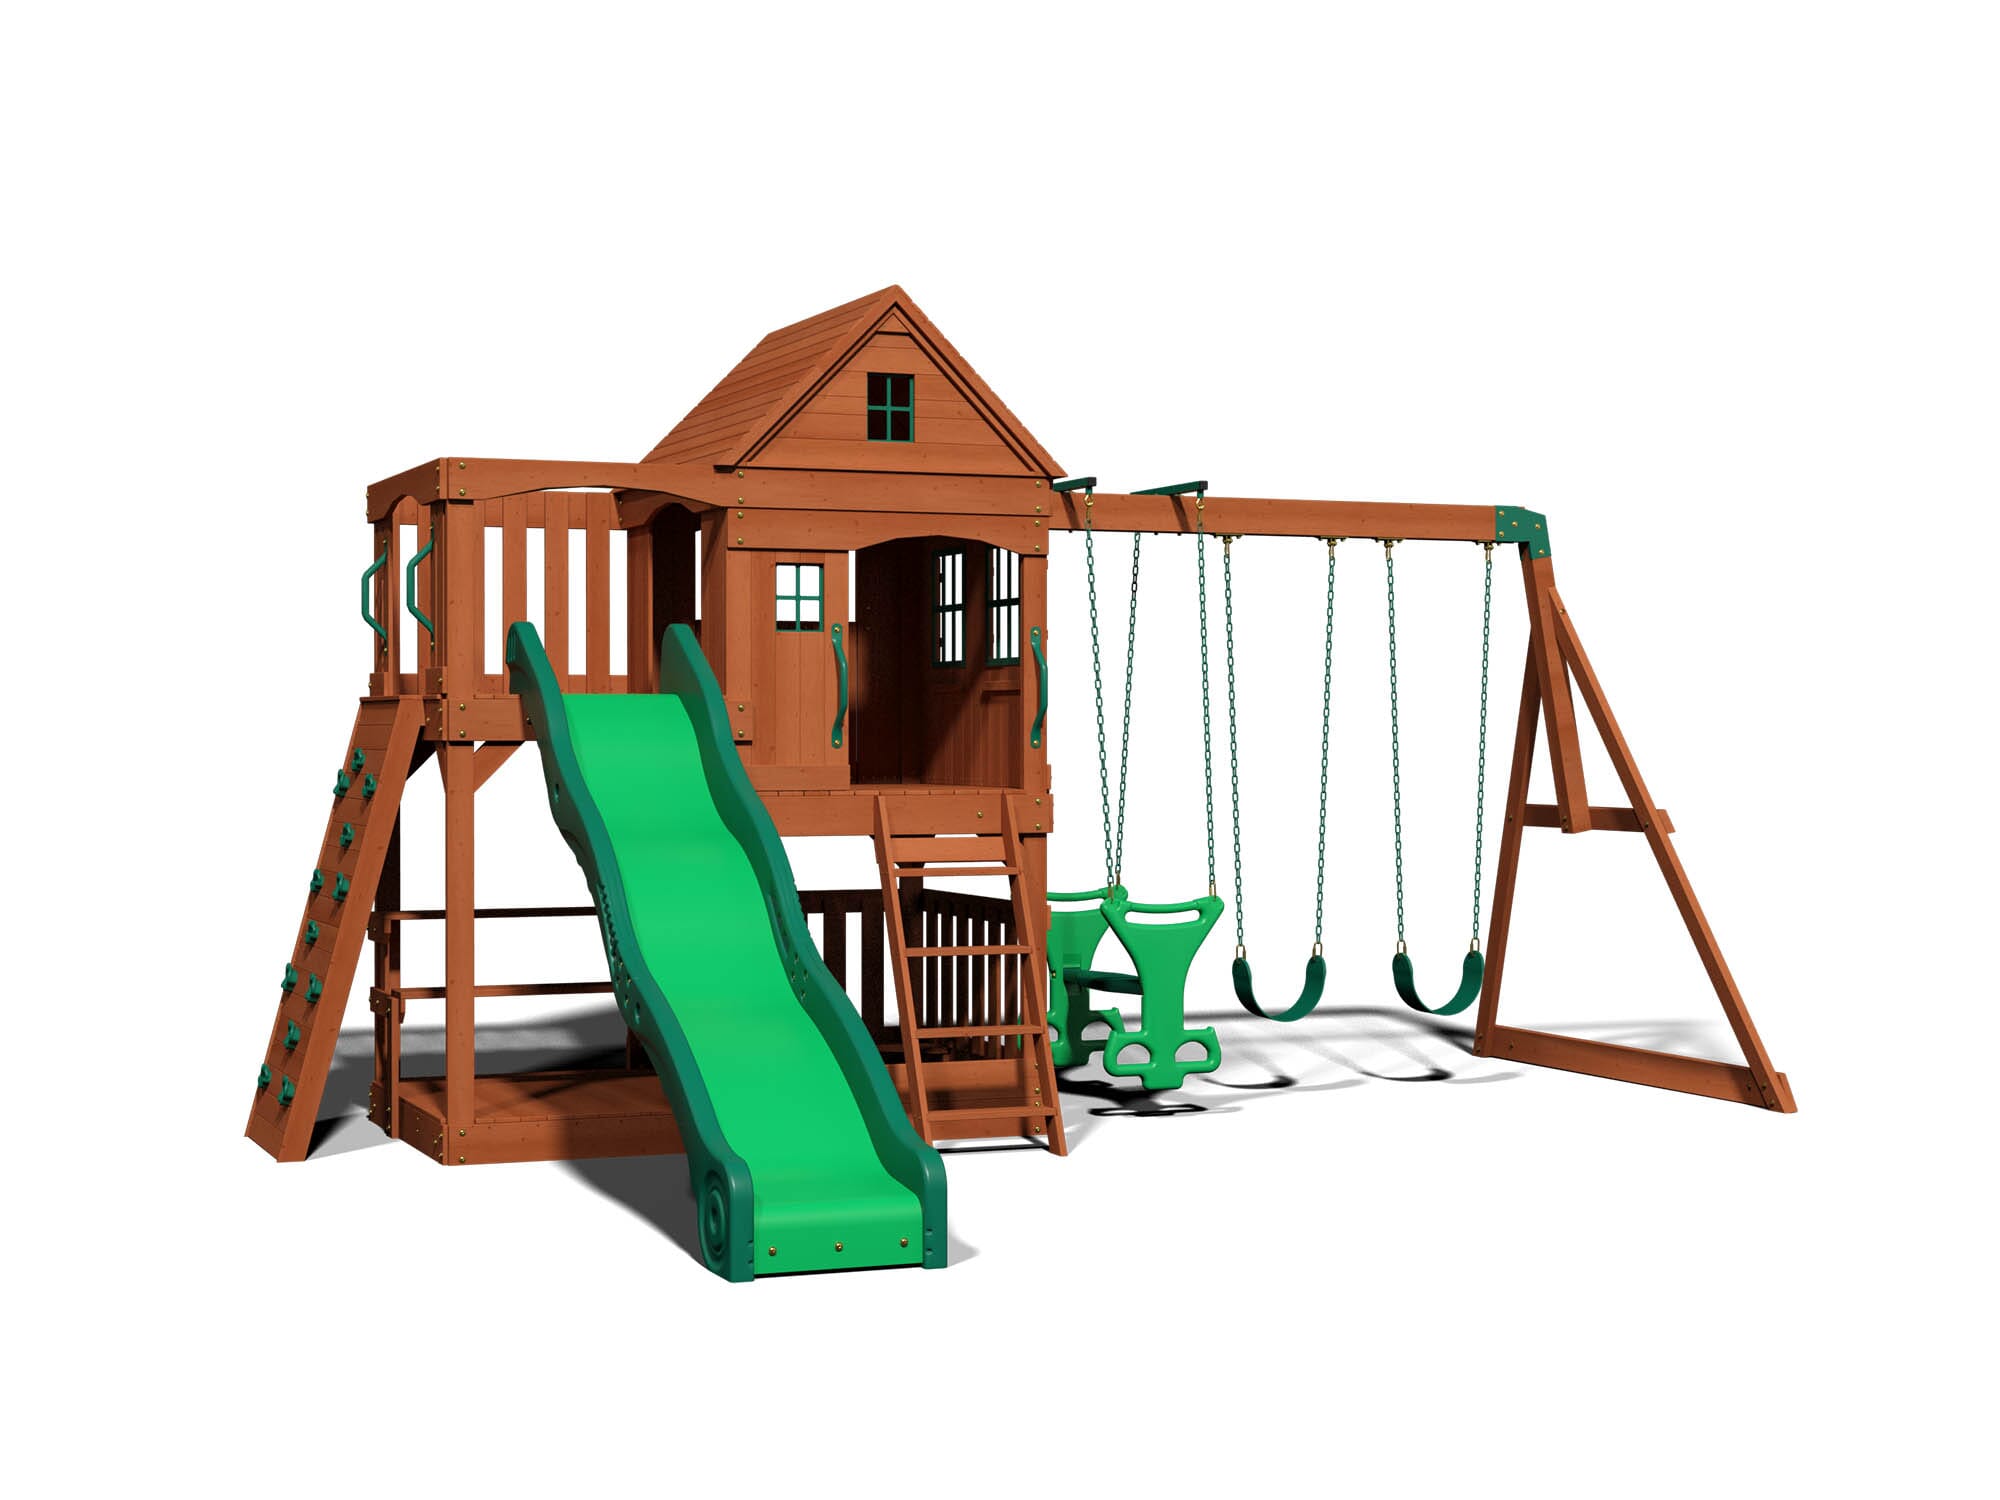 Pacific View Wooden Swing Set